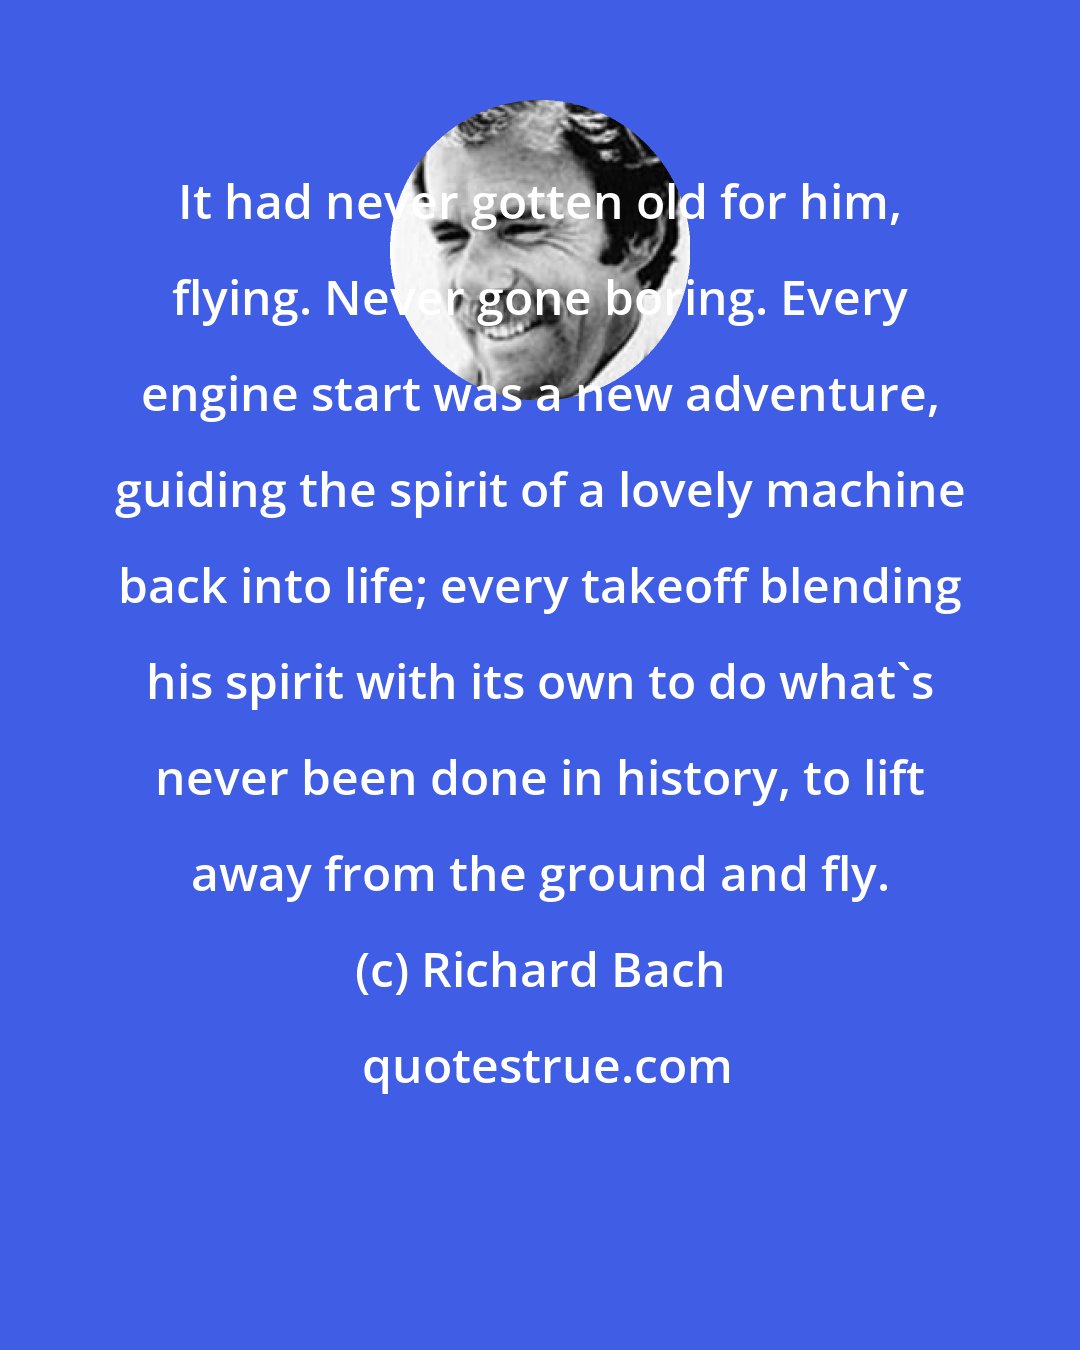 Richard Bach: It had never gotten old for him, flying. Never gone boring. Every engine start was a new adventure, guiding the spirit of a lovely machine back into life; every takeoff blending his spirit with its own to do what's never been done in history, to lift away from the ground and fly.